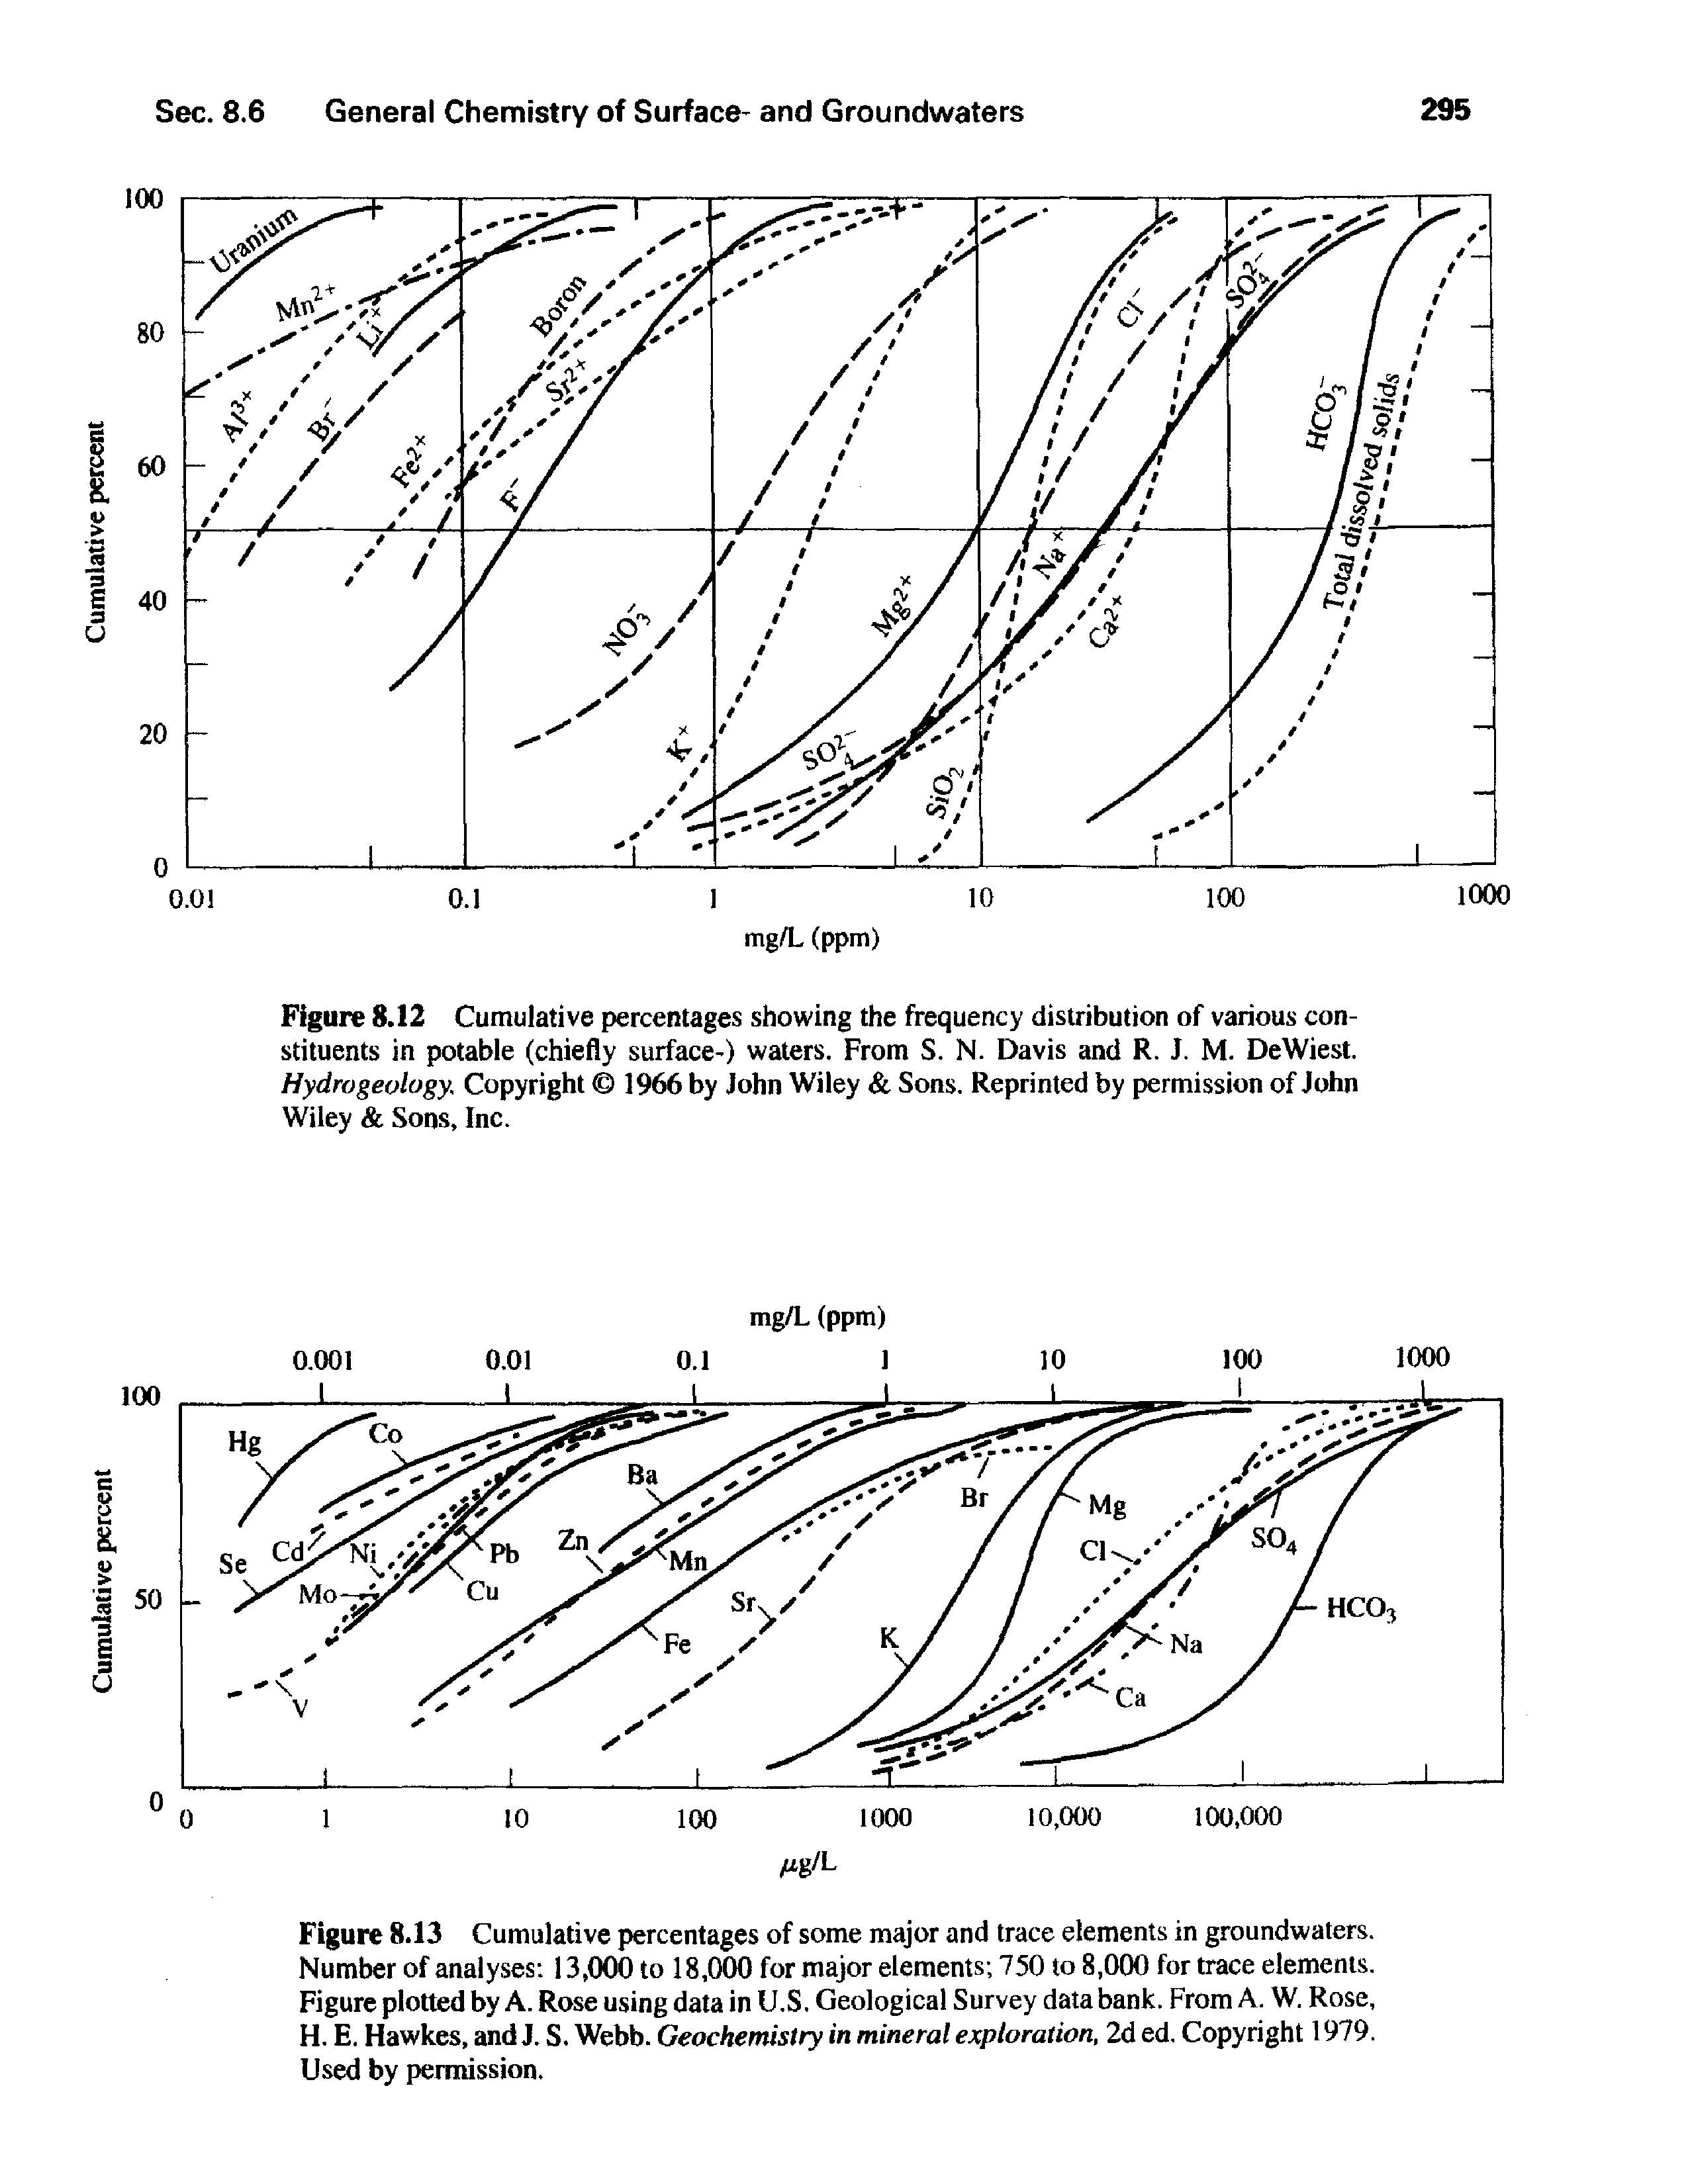 Figure 8.13 Cumulative percentages of some major and trace elements in groundwaters. Number of analyses 13,000 to 18,000 for major elements 750 to 8,000 for trace elements. Figure plotted by A. Rose using data in U.S. Geological Survey data bank. From A. W. Rose, H. E. Hawkes, and J. S. Webb. Geochemistry in mineral exploration, 2d ed. Copyright 1979. Used by permission.